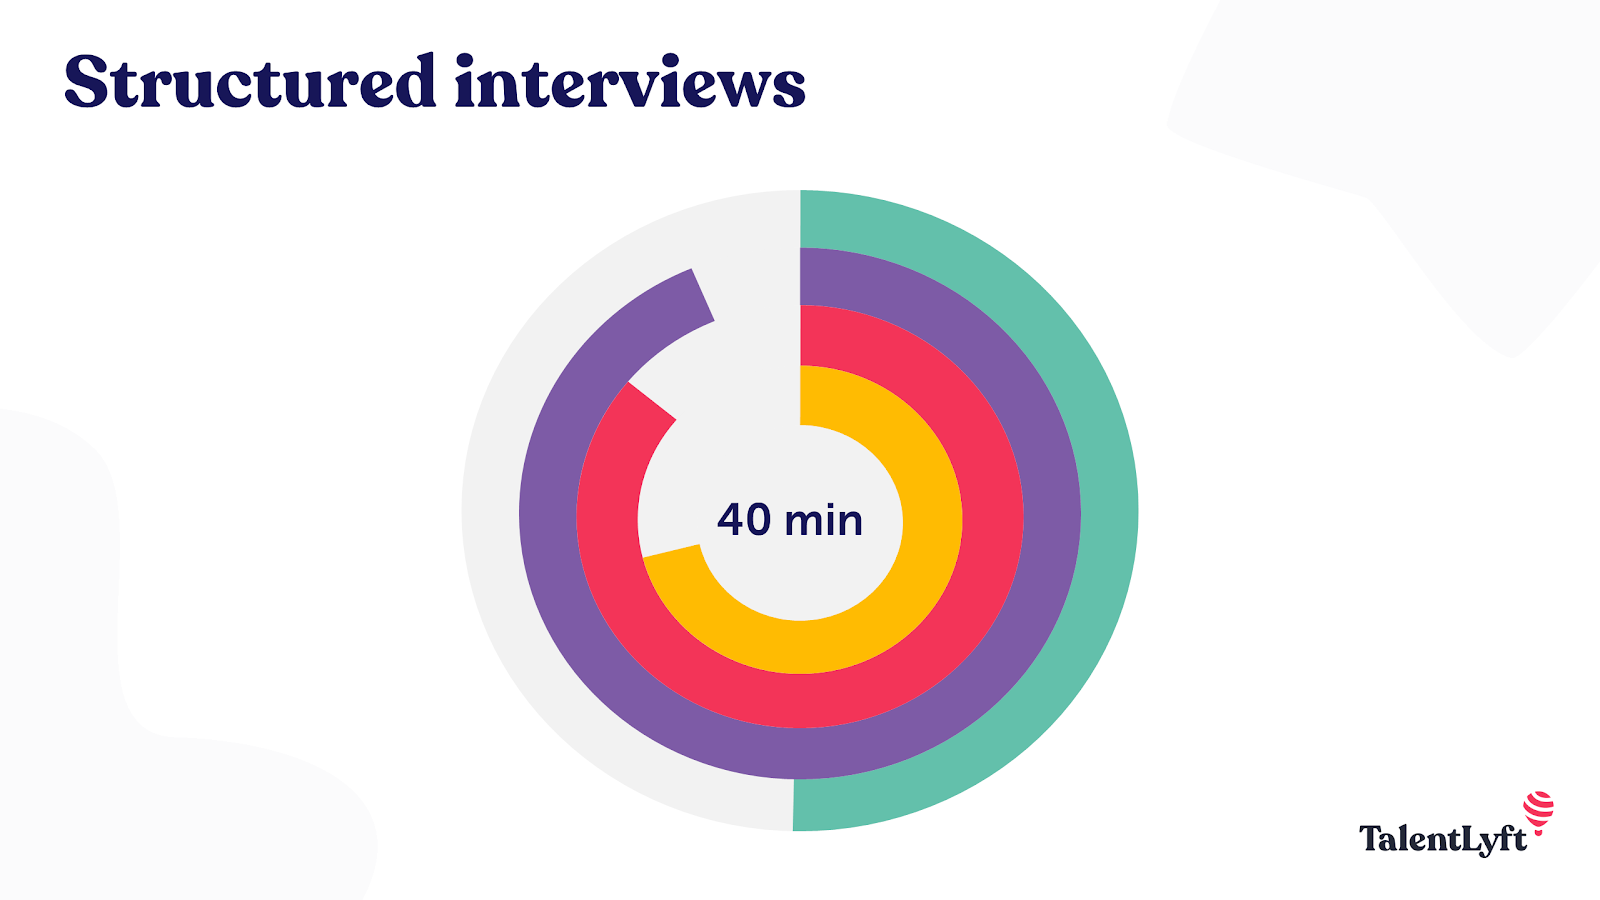 Structured interviews save time